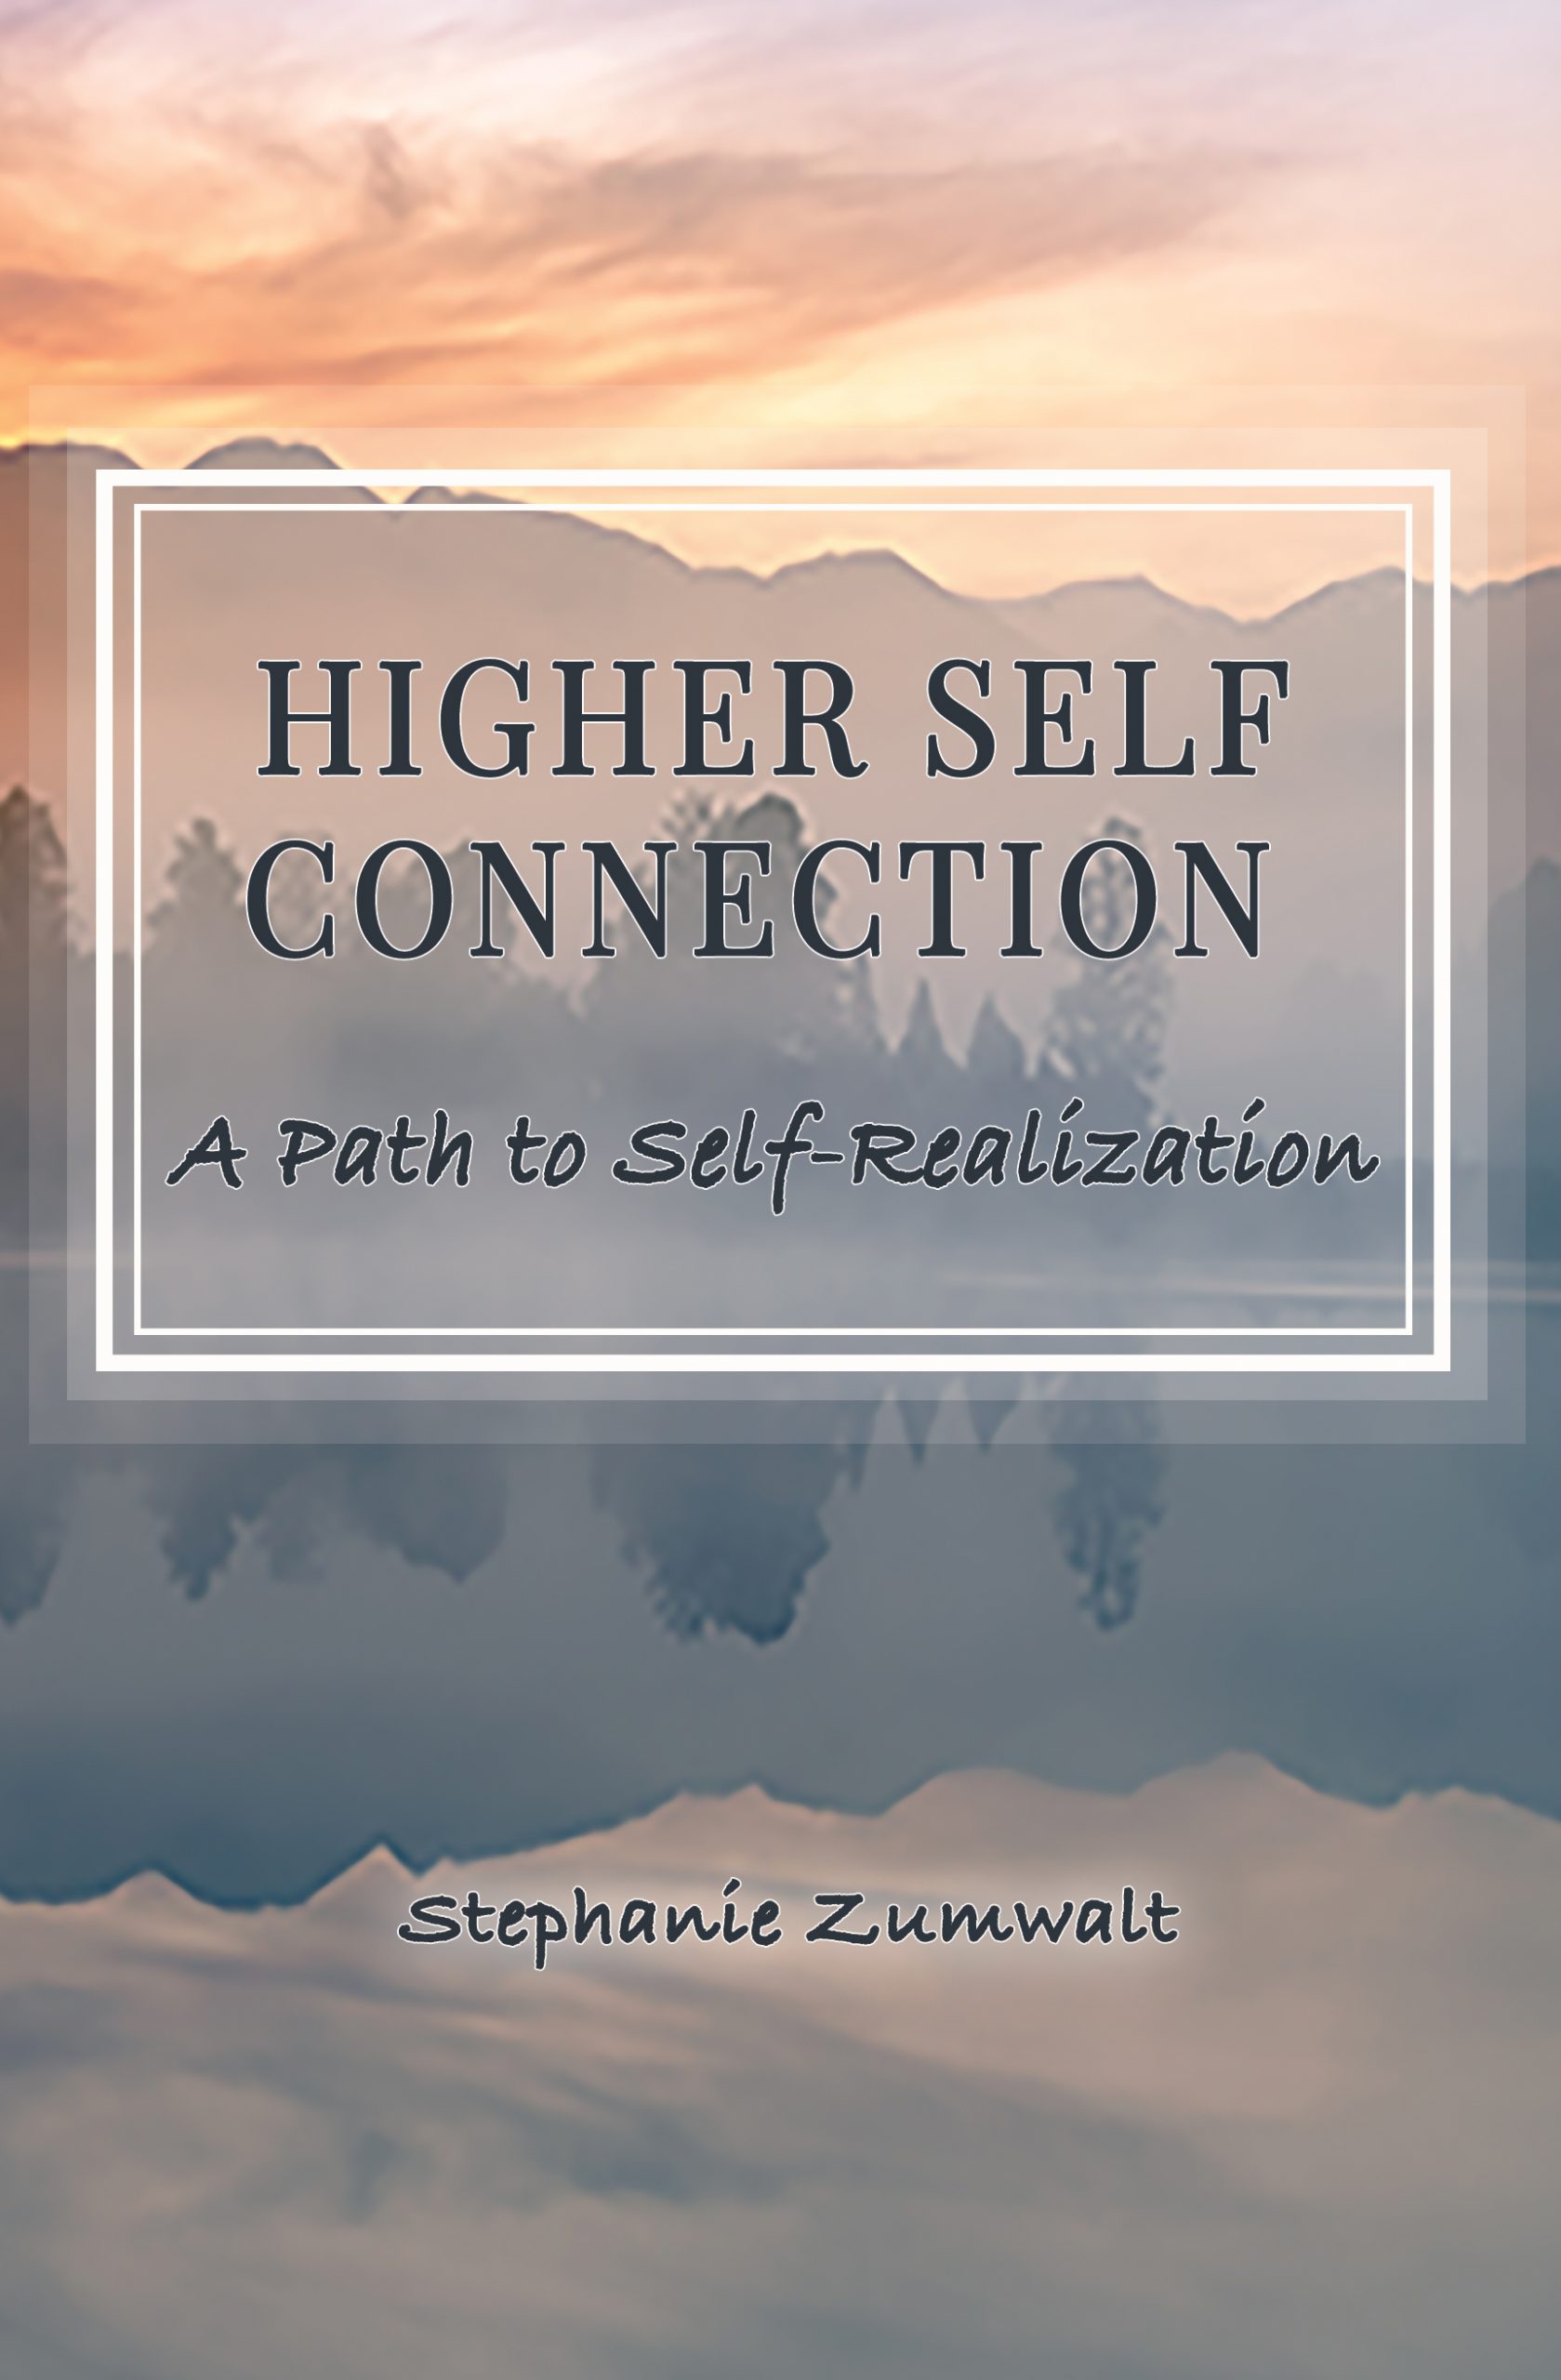 Higher Self Connection: A Path to Self-Realization